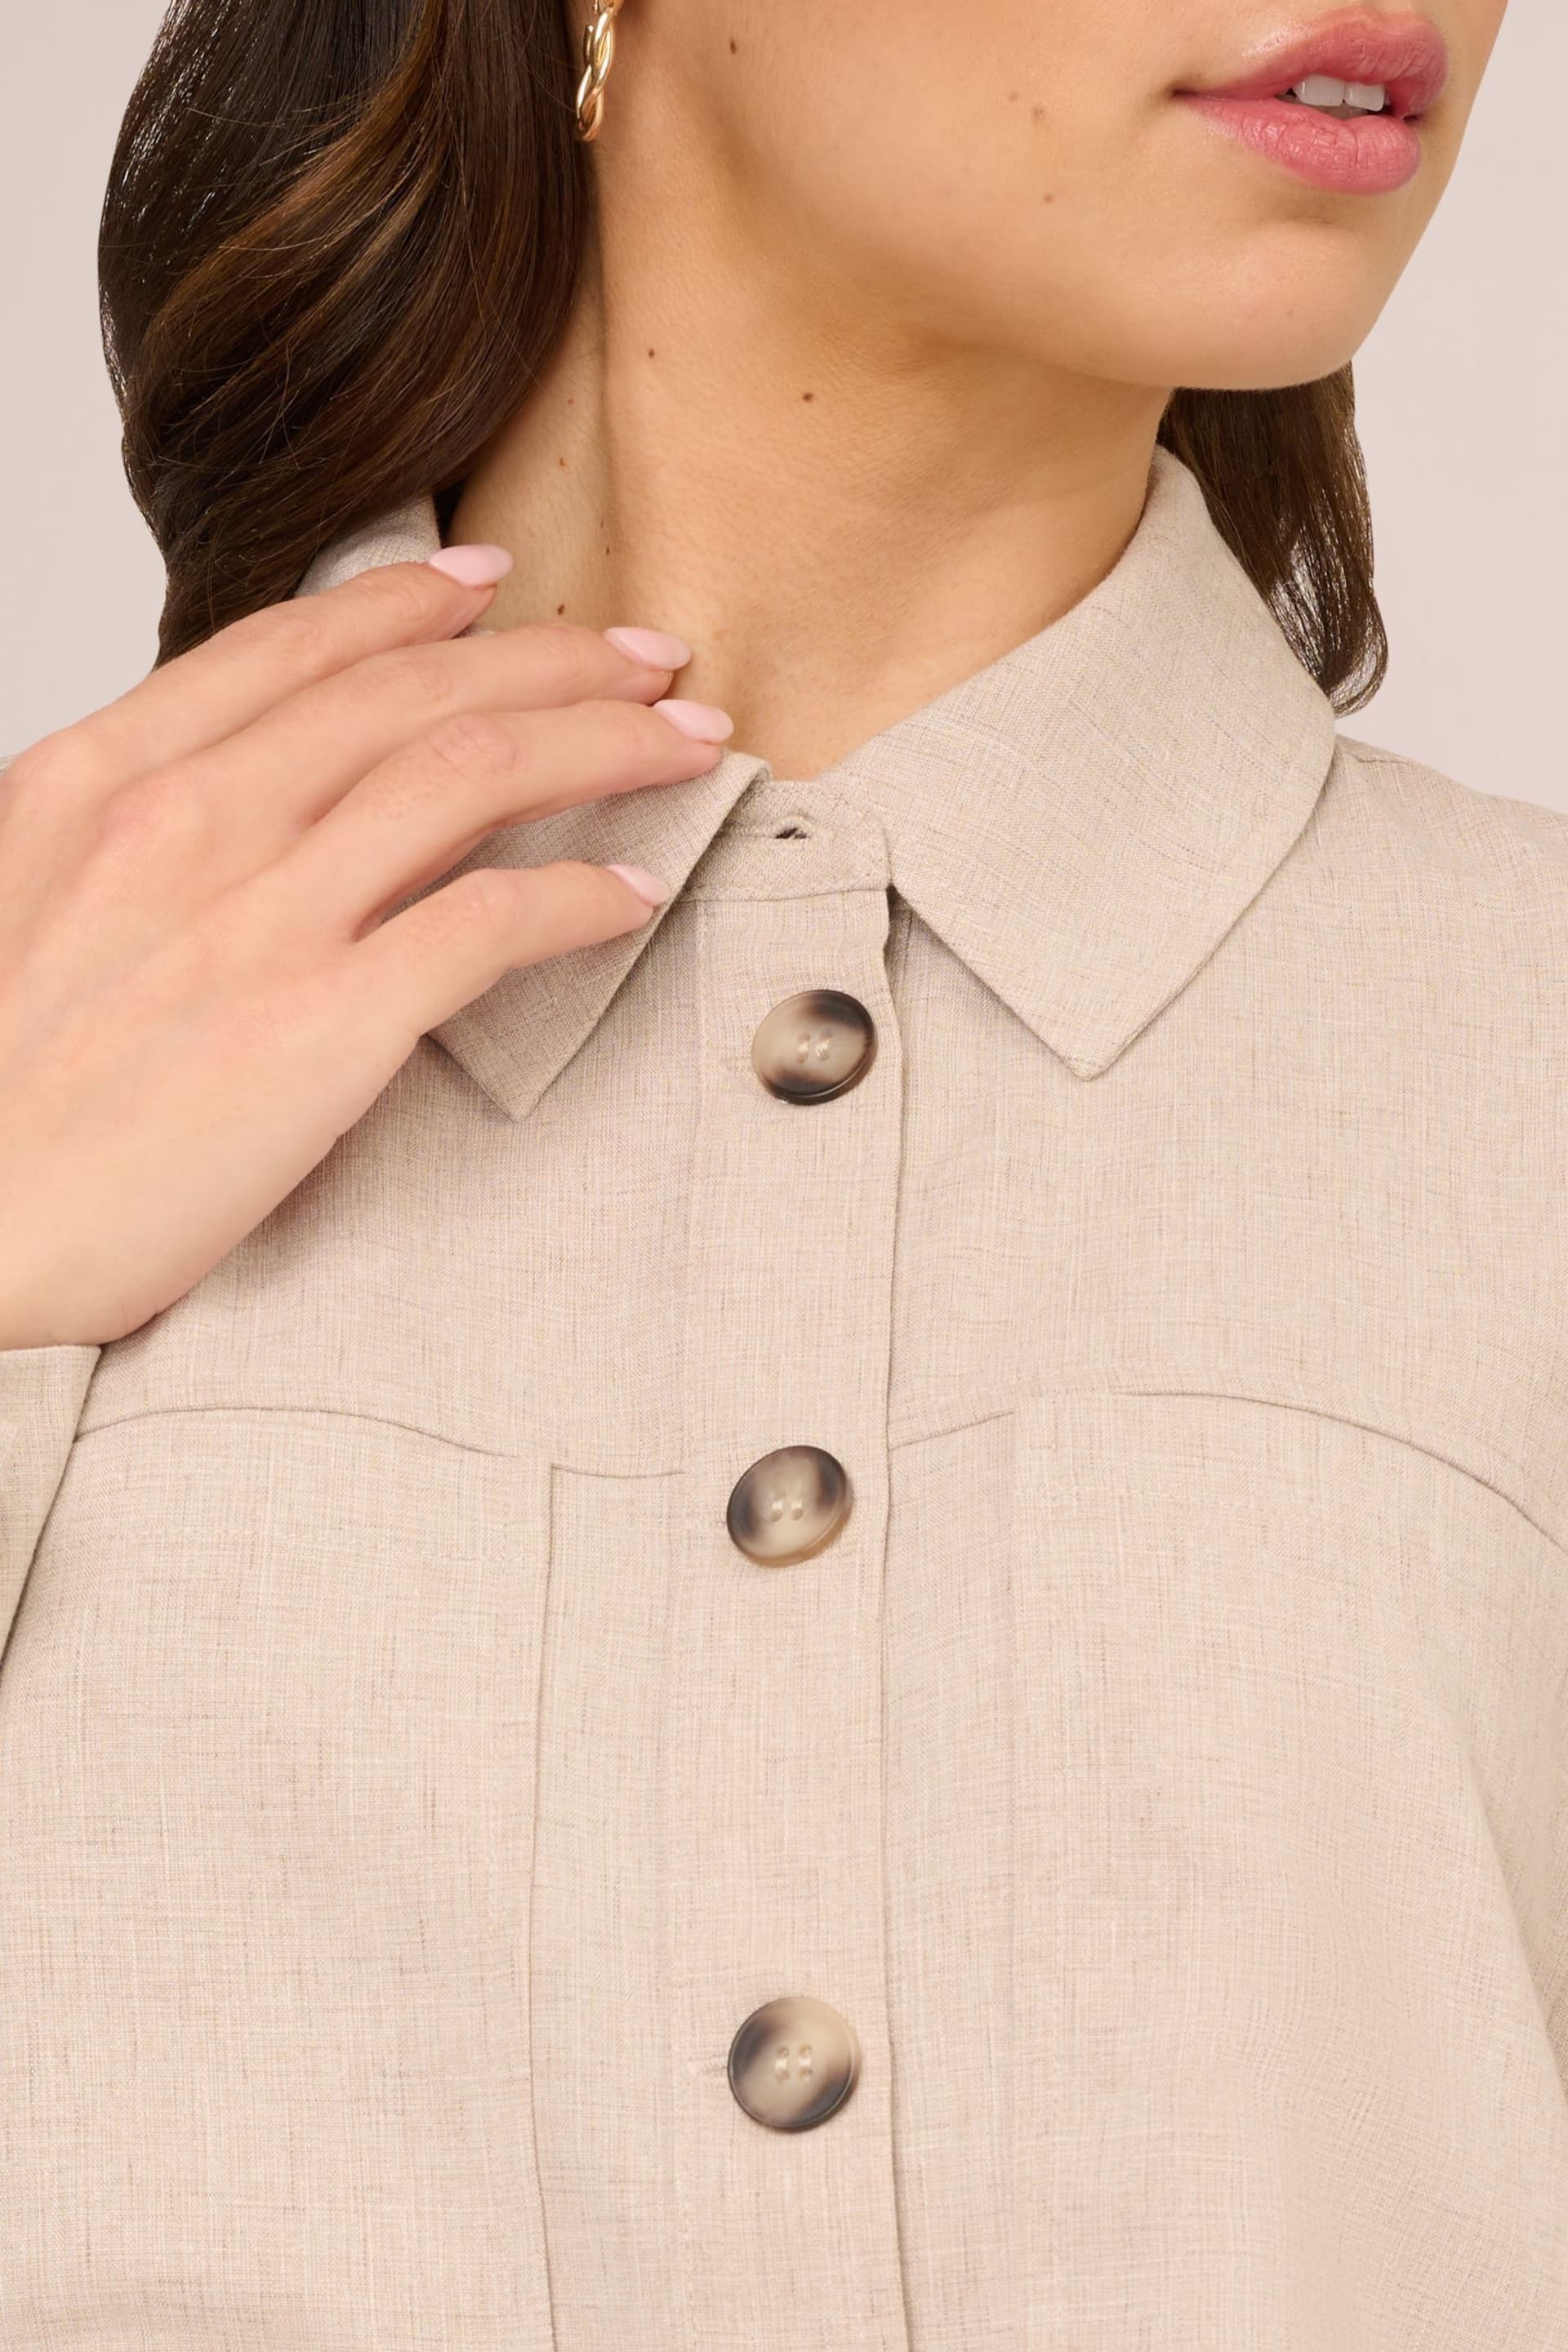 Adrianna Papell Natural Solid Long Sleeve Button Up Utility Unlined Jacket - Image 4 of 7